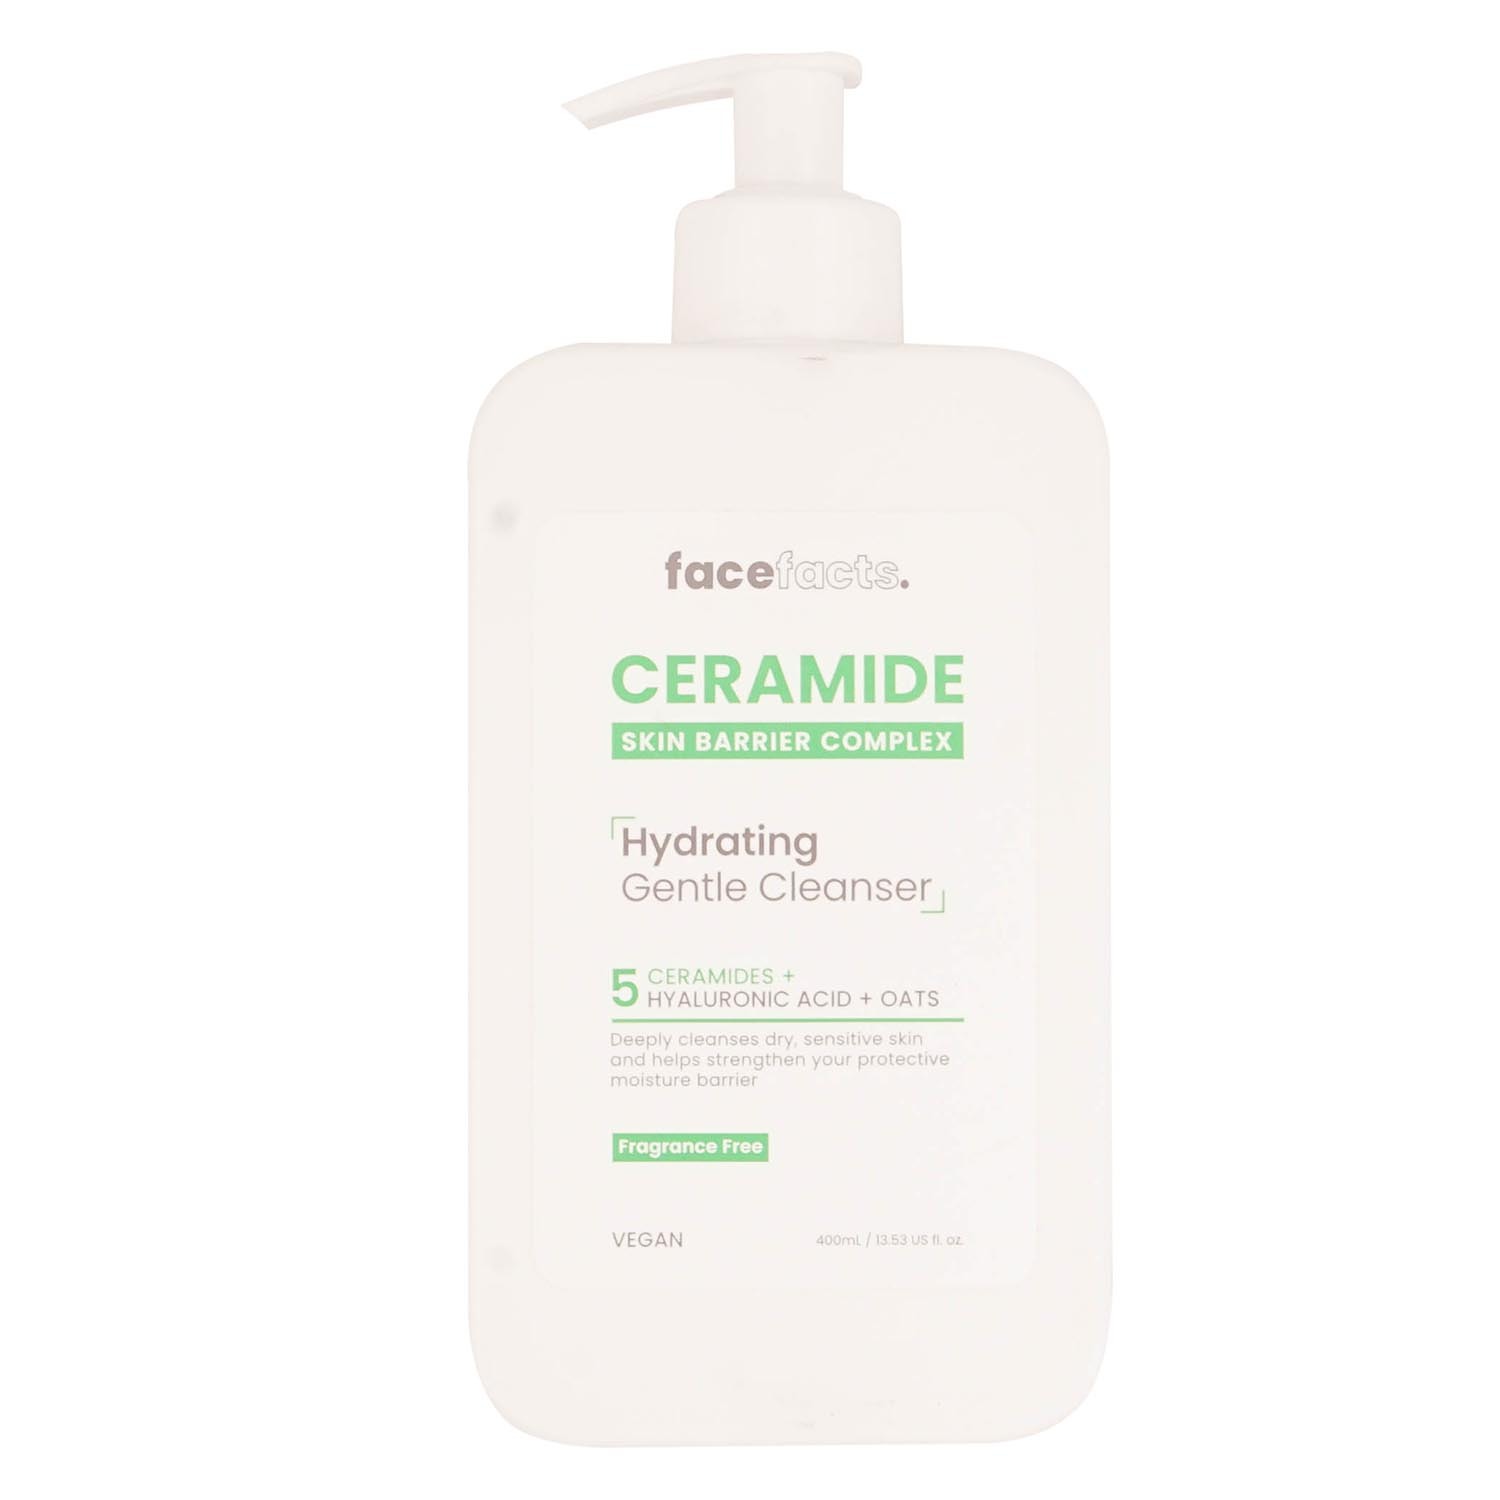 Face Facts Ceramide Hydrating Cleanser Image 1